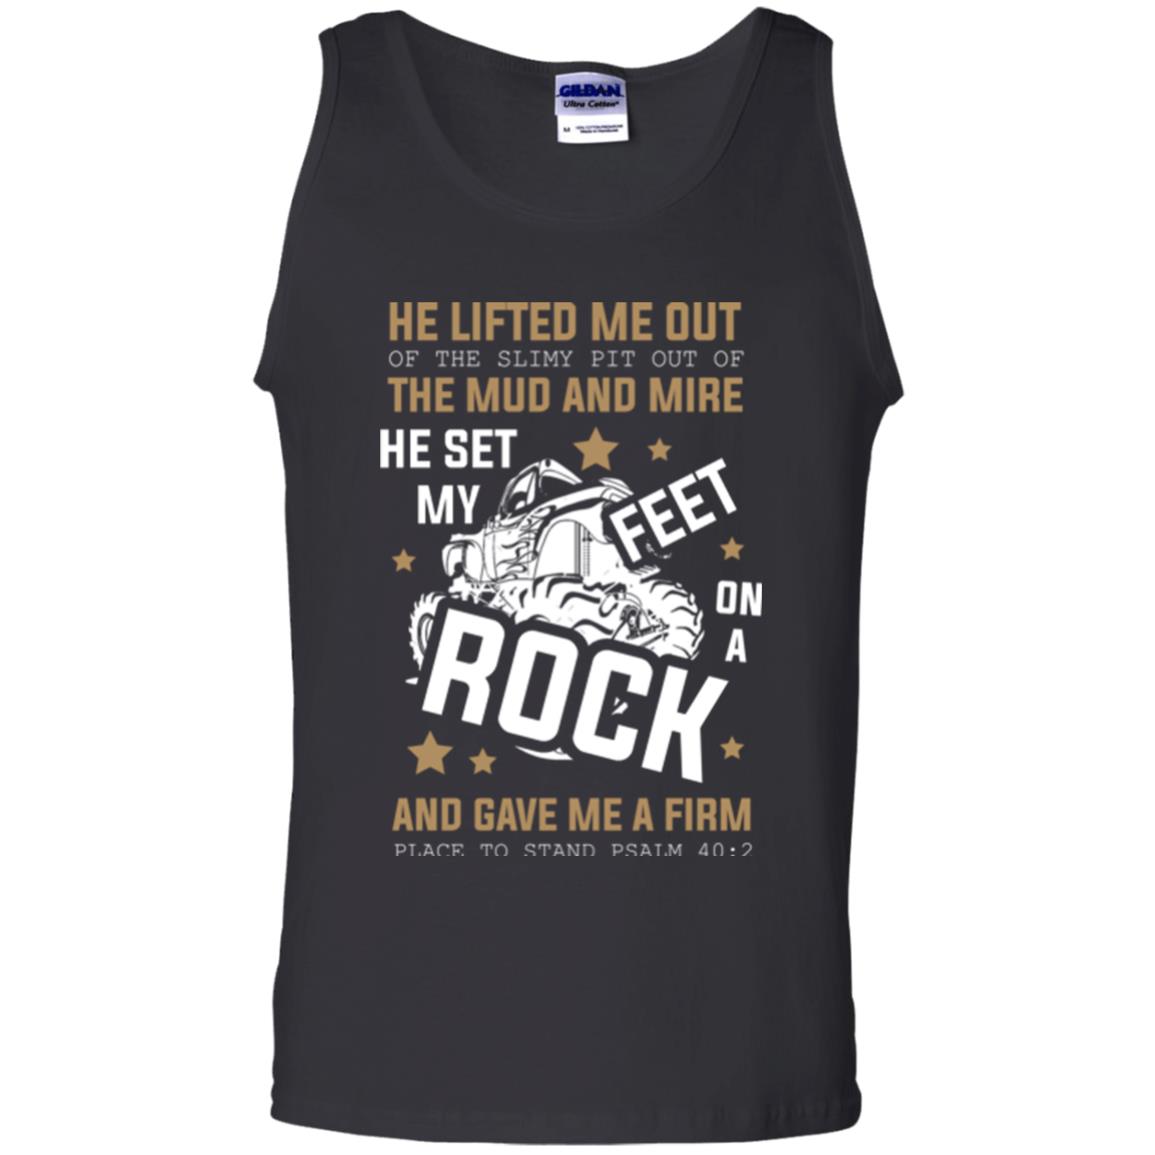 Christian T-shirt He Lifted Me Out Of The Slimy Pit Out Of The Mud And